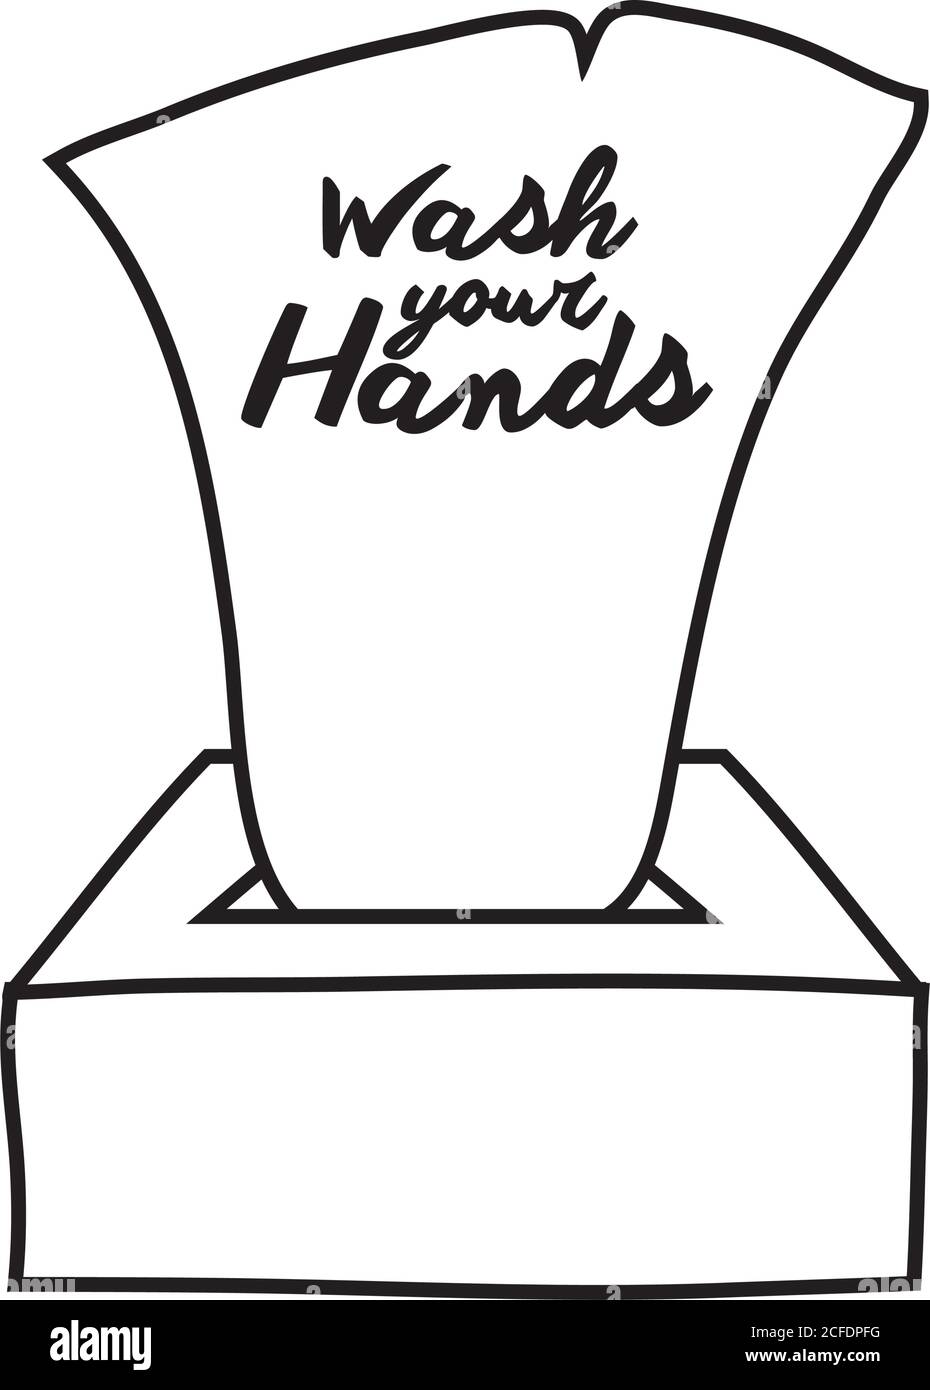 wash your hands campaign lettering with vector illustration design Stock Vector